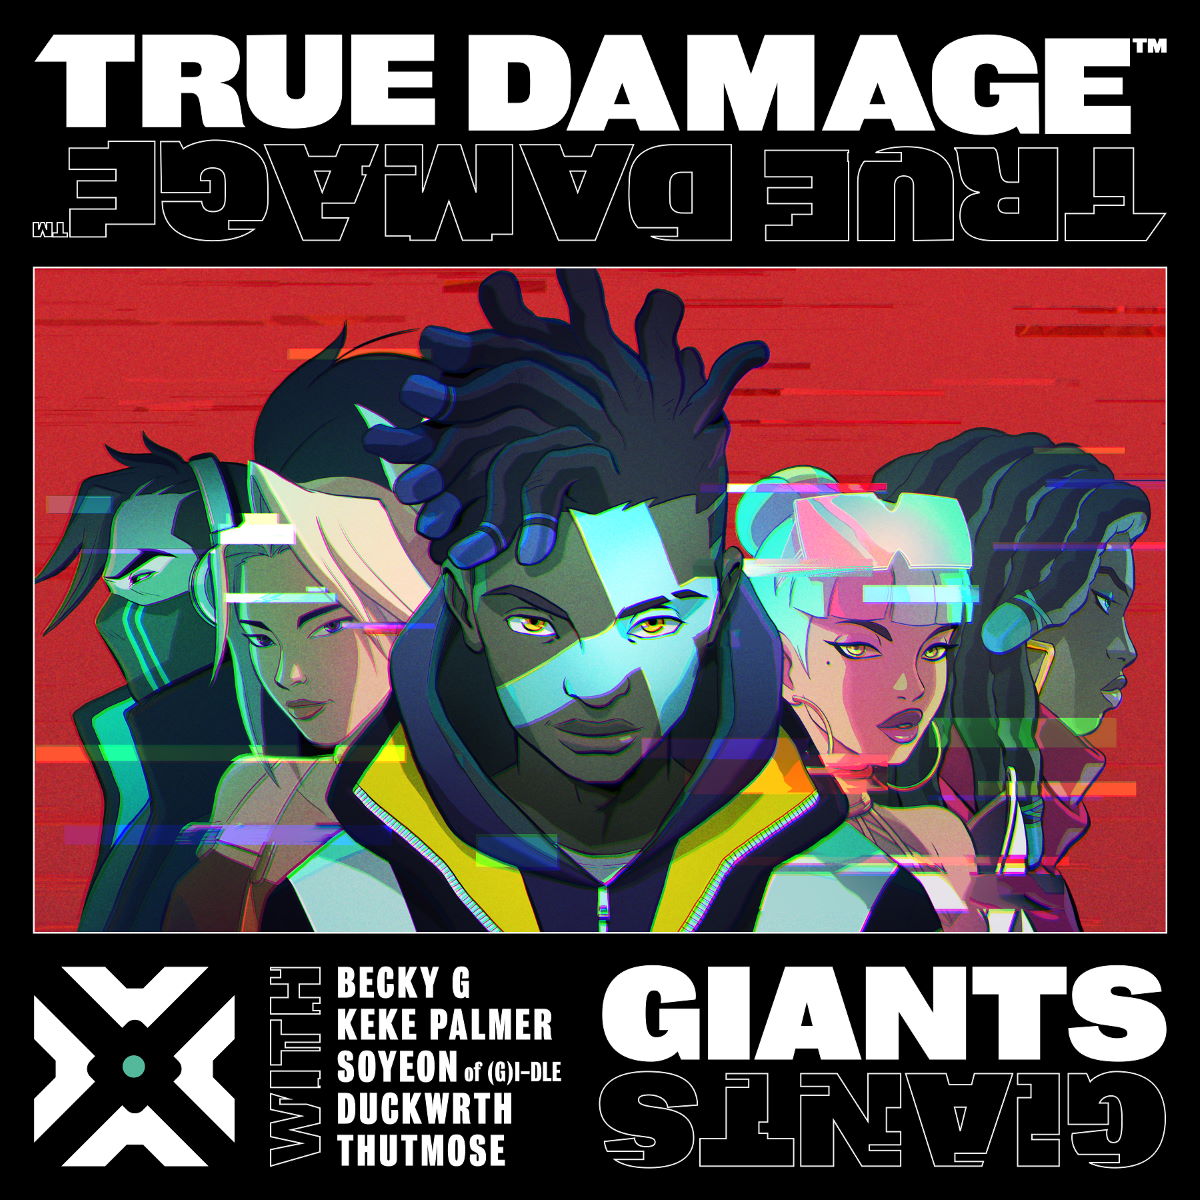 Cover art for『True Damage - GIANTS』from the release『GIANTS